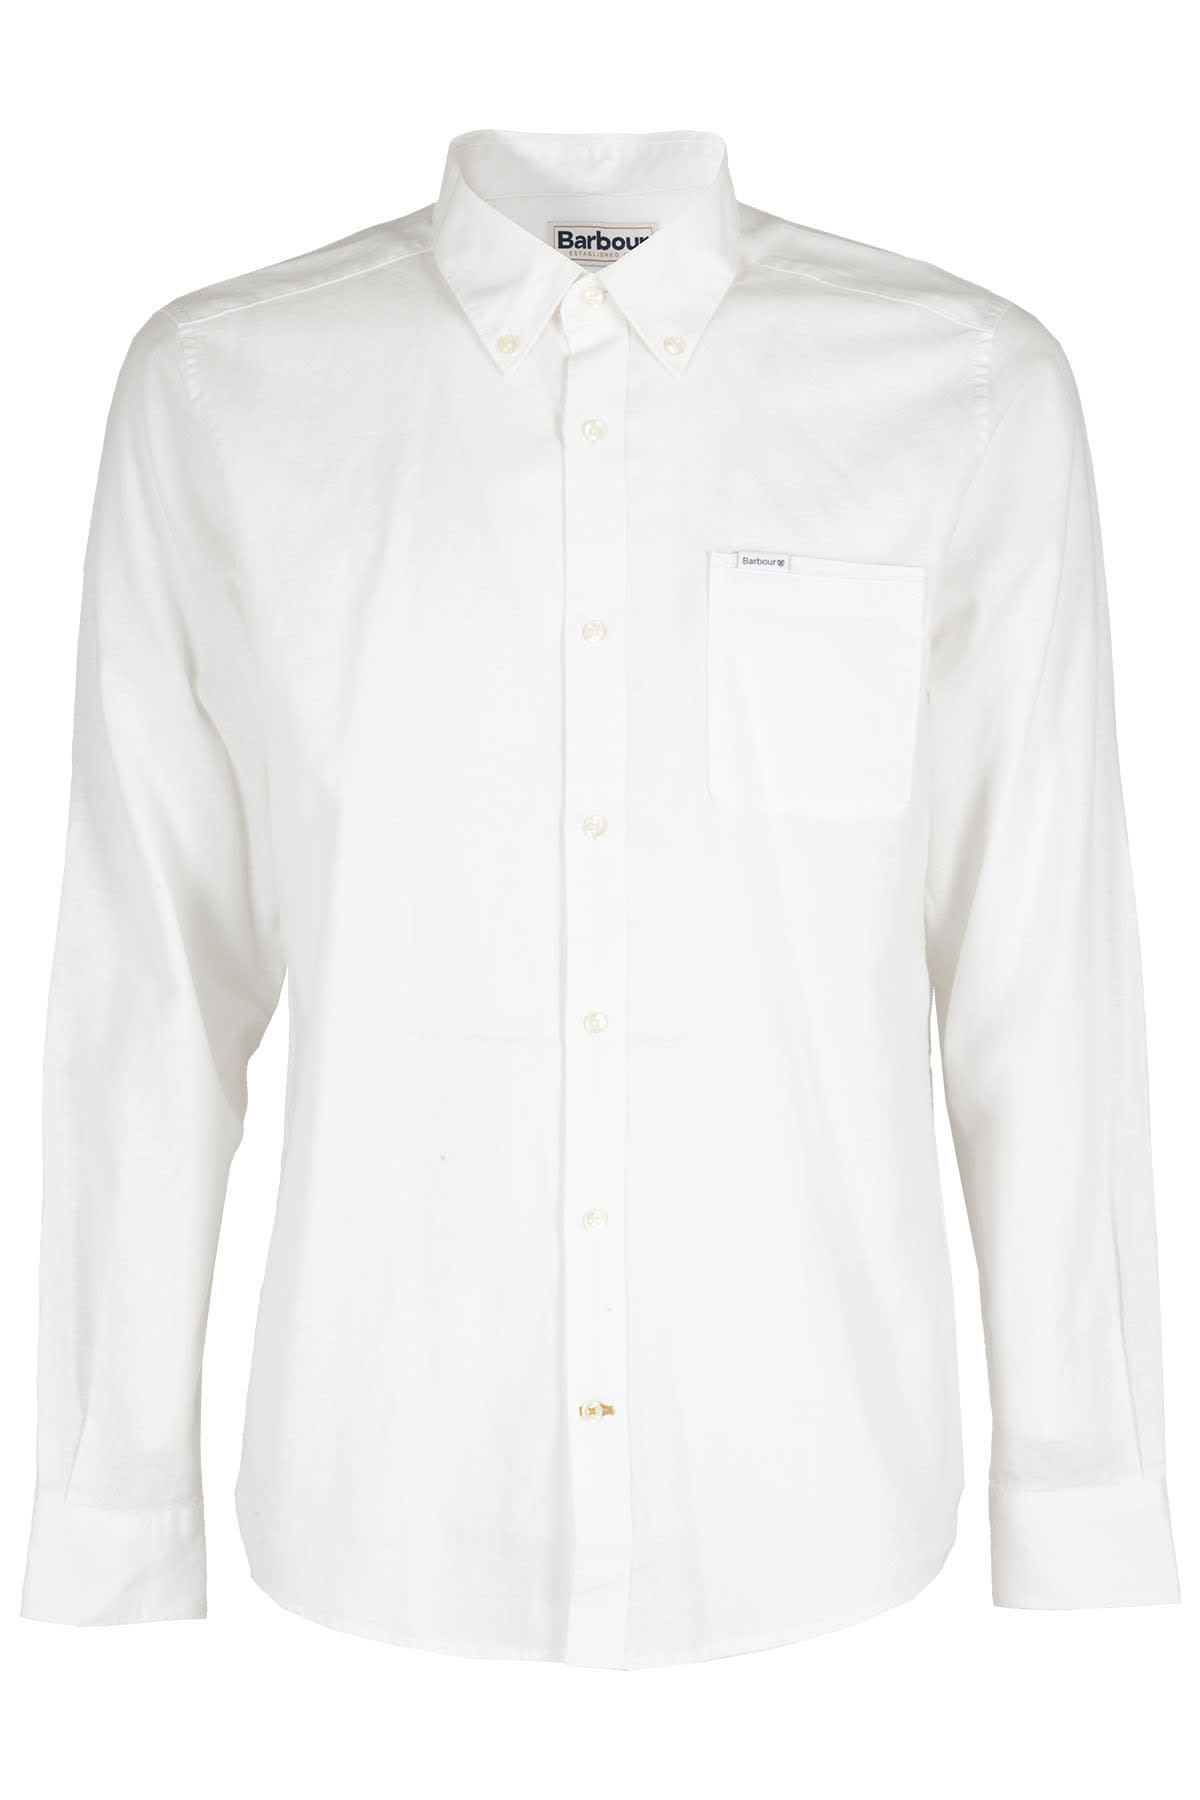 Barbour Thorpe Tailored In White